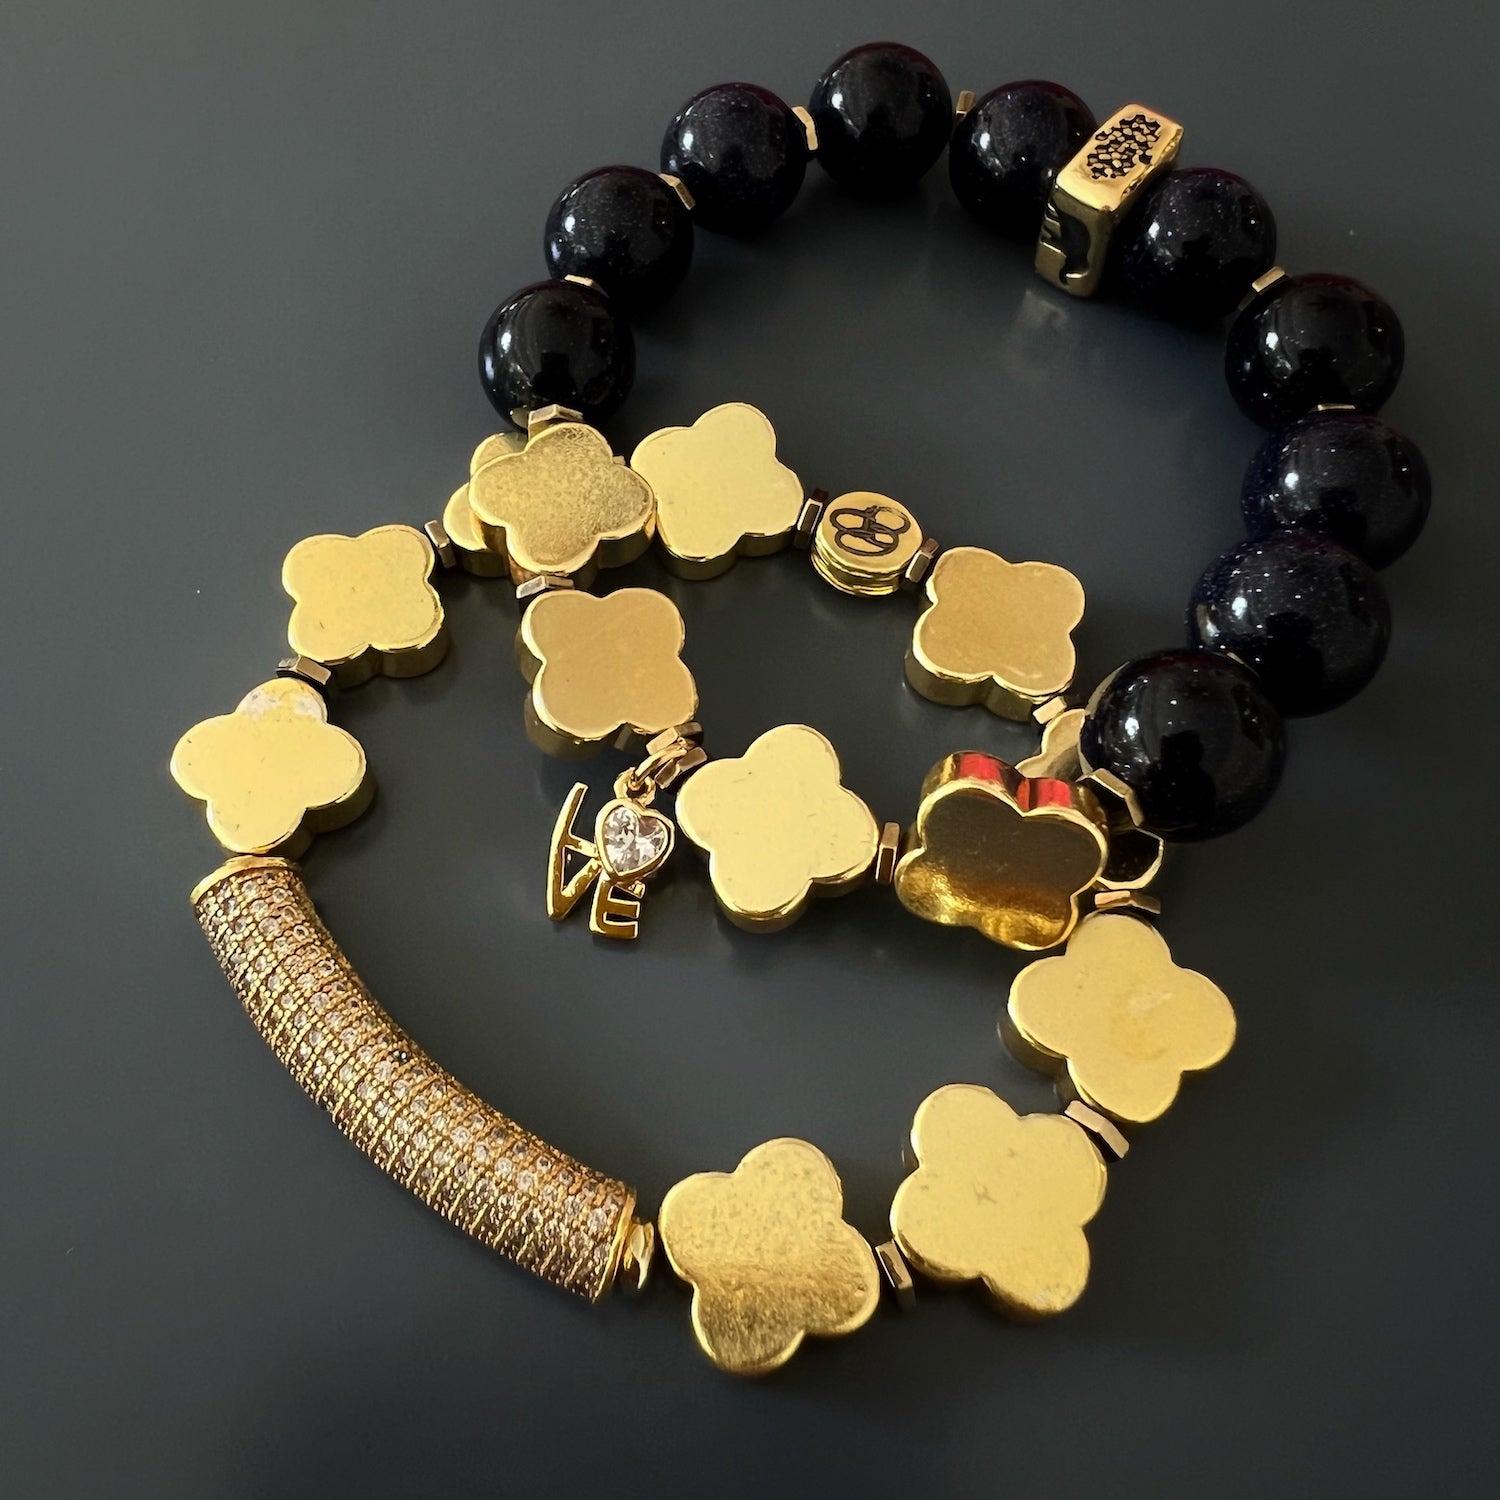 Gold Charm Bracelet - Stylish and meaningful bracelet with a handcrafted gold charm symbolizing love, enhanced with a simulated diamond for a touch of glamour.